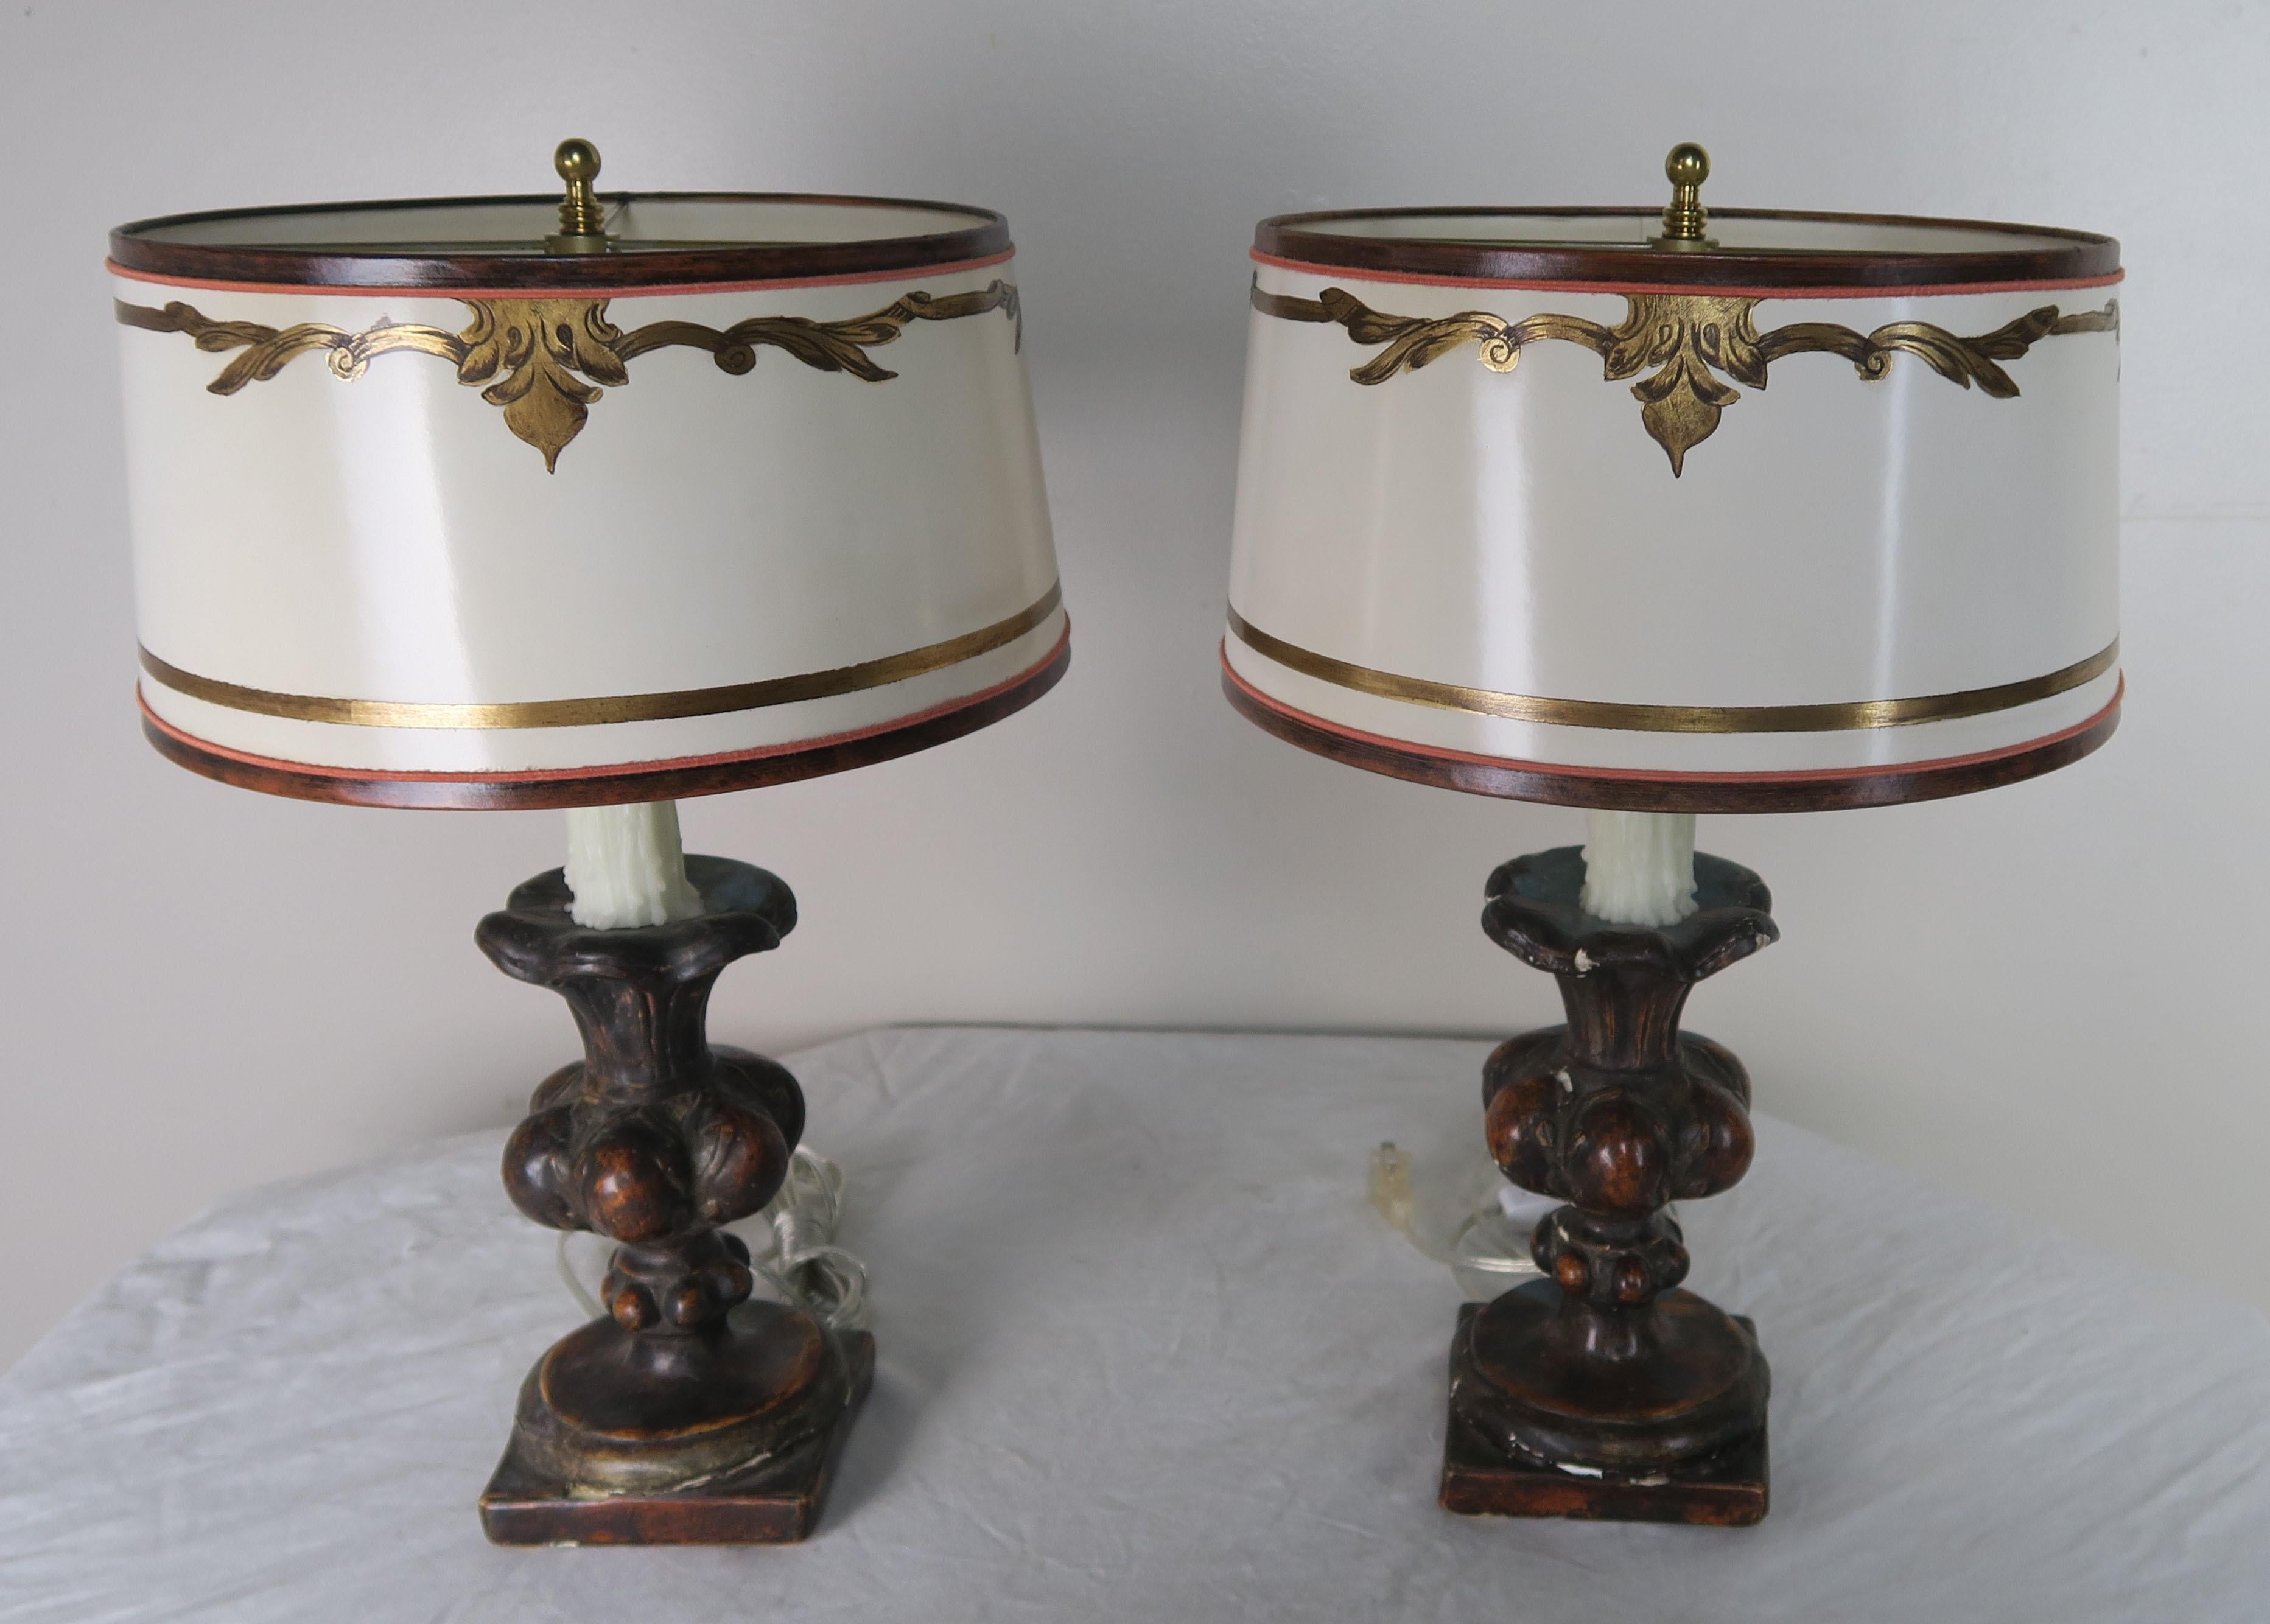 Pair of custom lamps made with 19th century carved wood polychrome candleholders wired into lamps with drip wax candles. The lamps are crowned with hand painted parchment shades. The lamps are newly rewired and are ready to install.